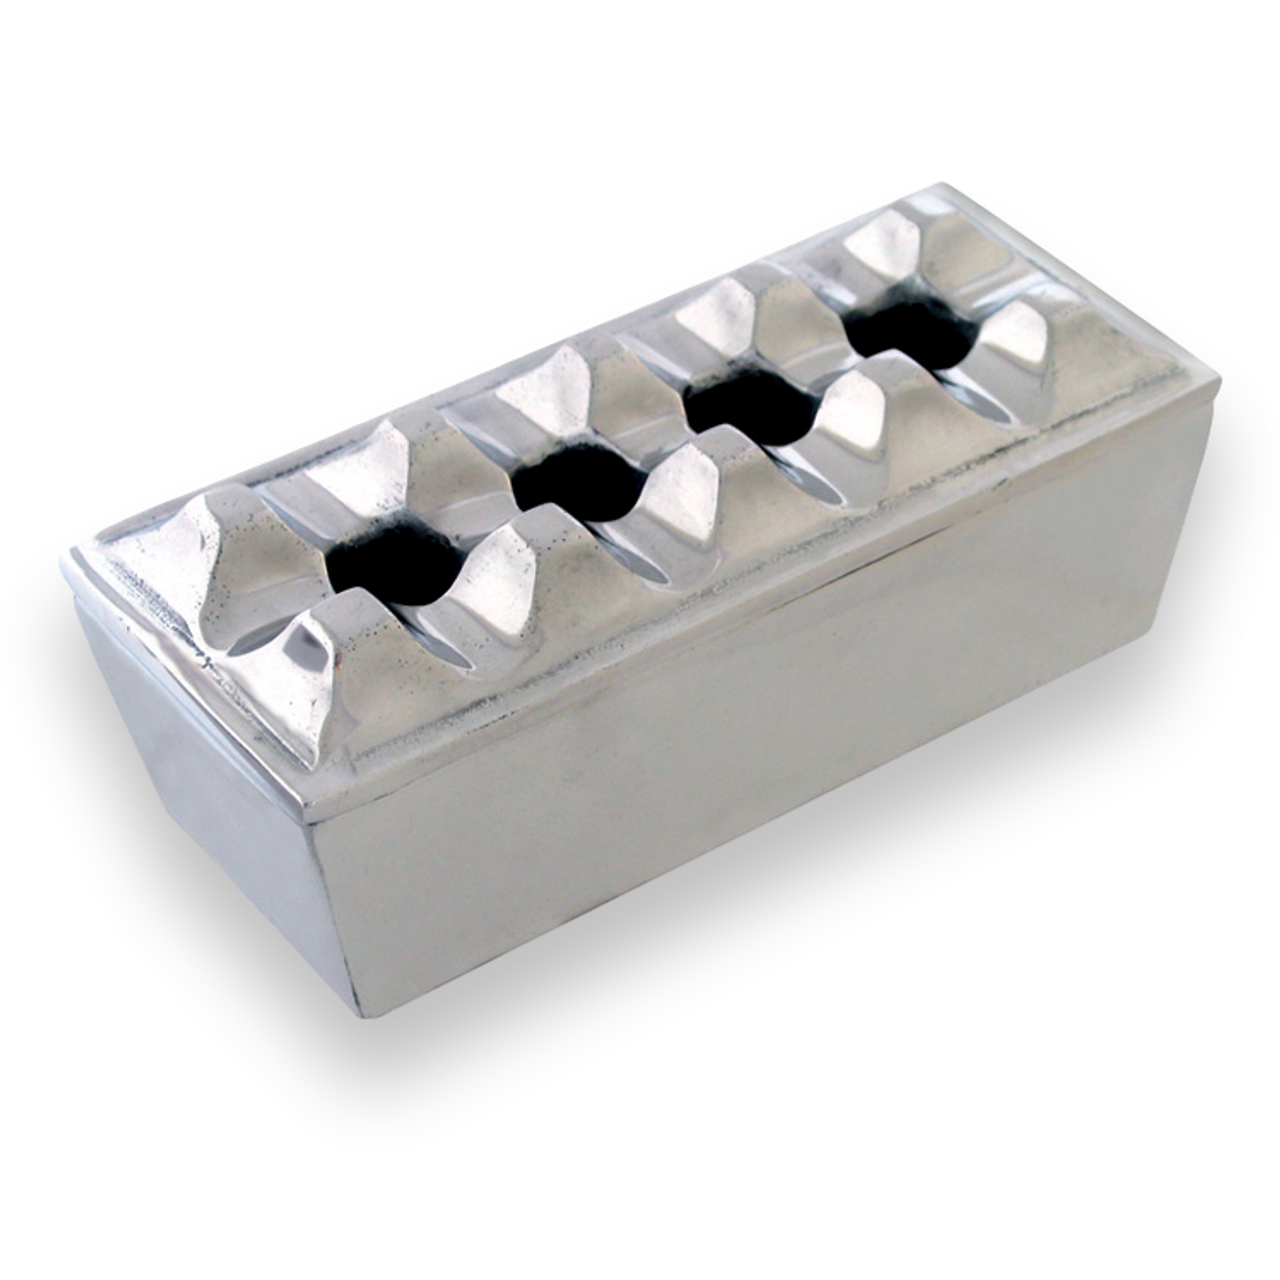 https://cdn11.bigcommerce.com/s-c63ufk/images/stencil/1280x1280/products/1357/7352/Quality-Importers-Polished-Rectangular-Metal-4-Cigar-Ashtray-9465-Exterior-Front-1_clipped_rev_1__27488.1610943072.png?c=2